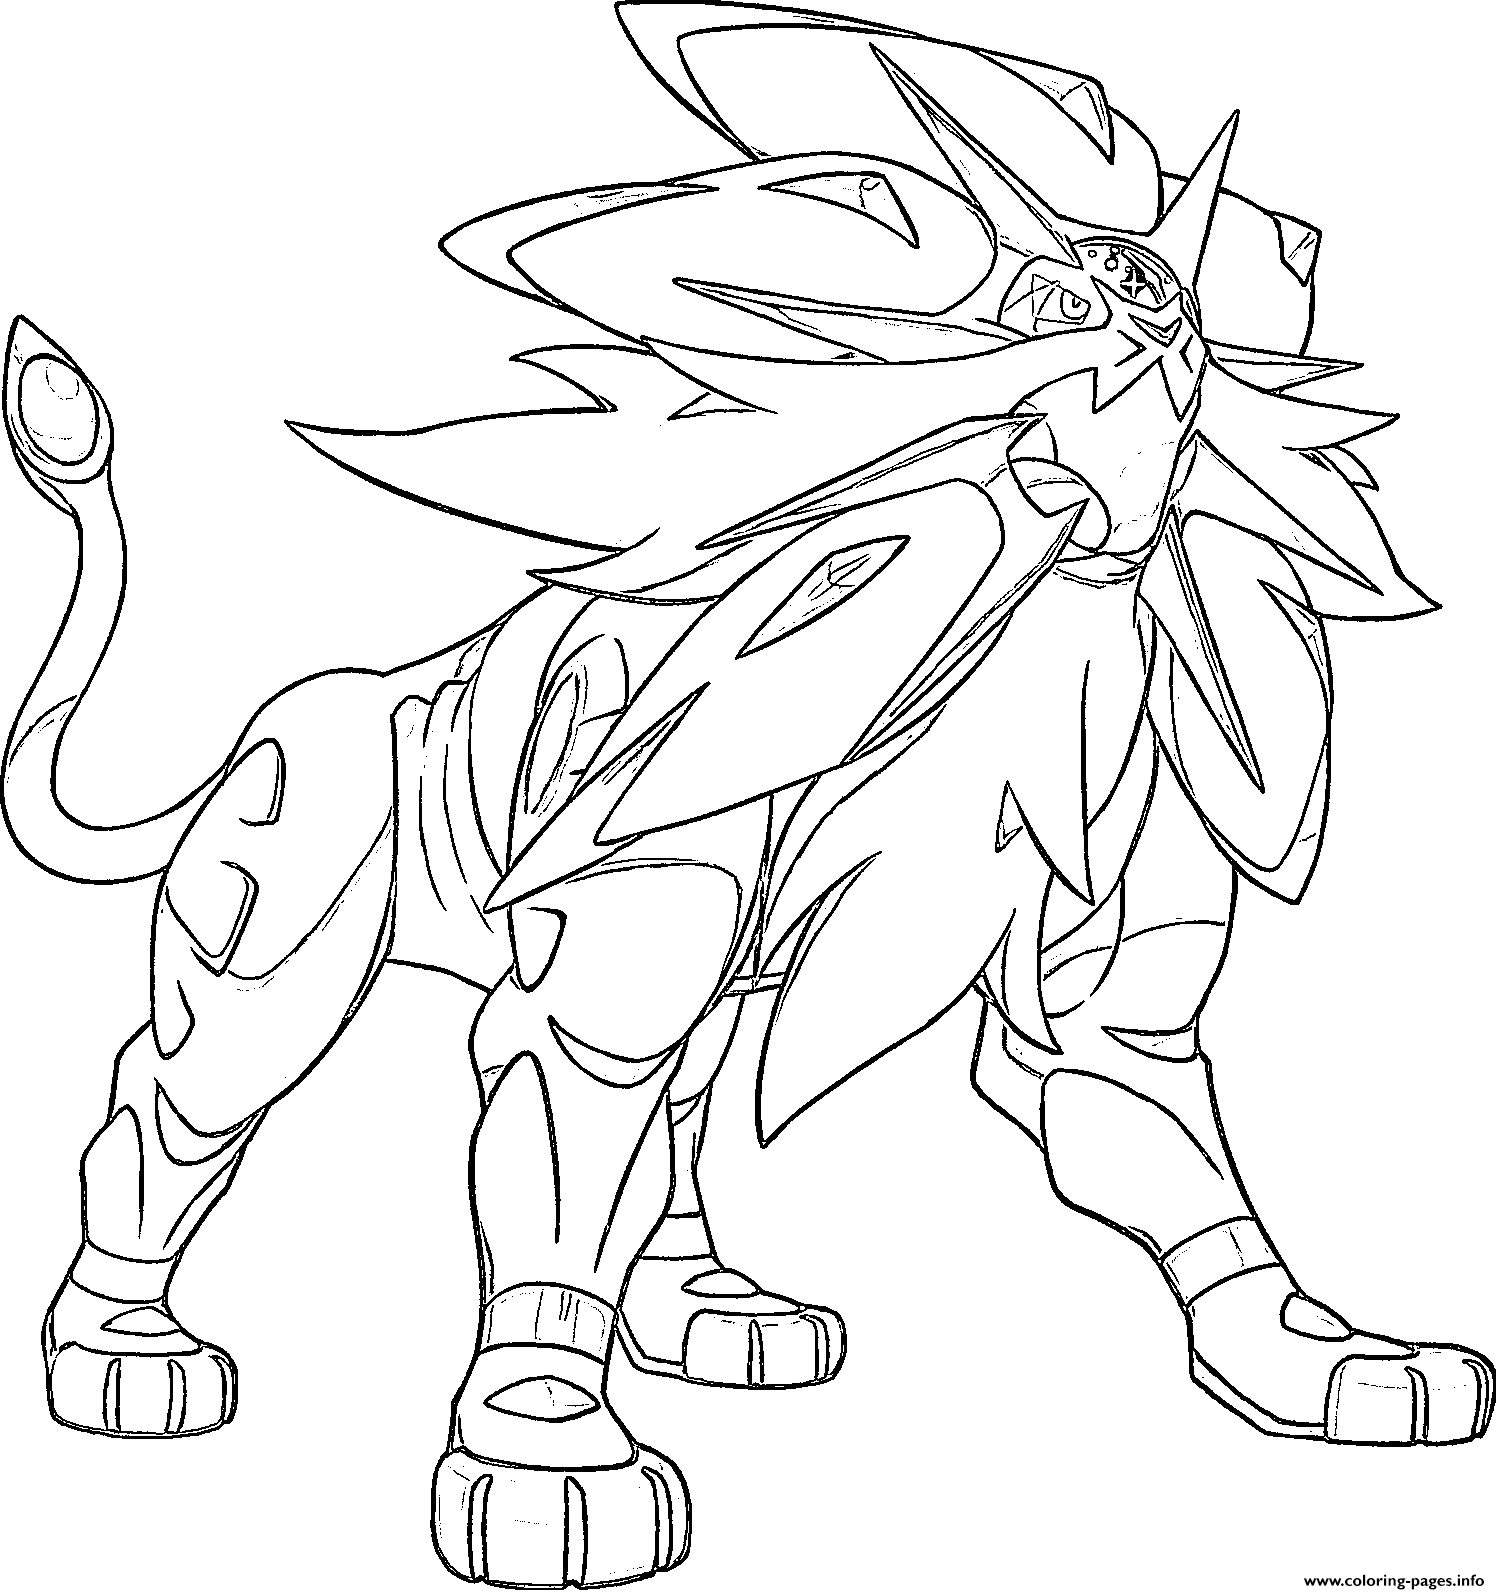 Solgaleo Coloring Pages - Coloring Home